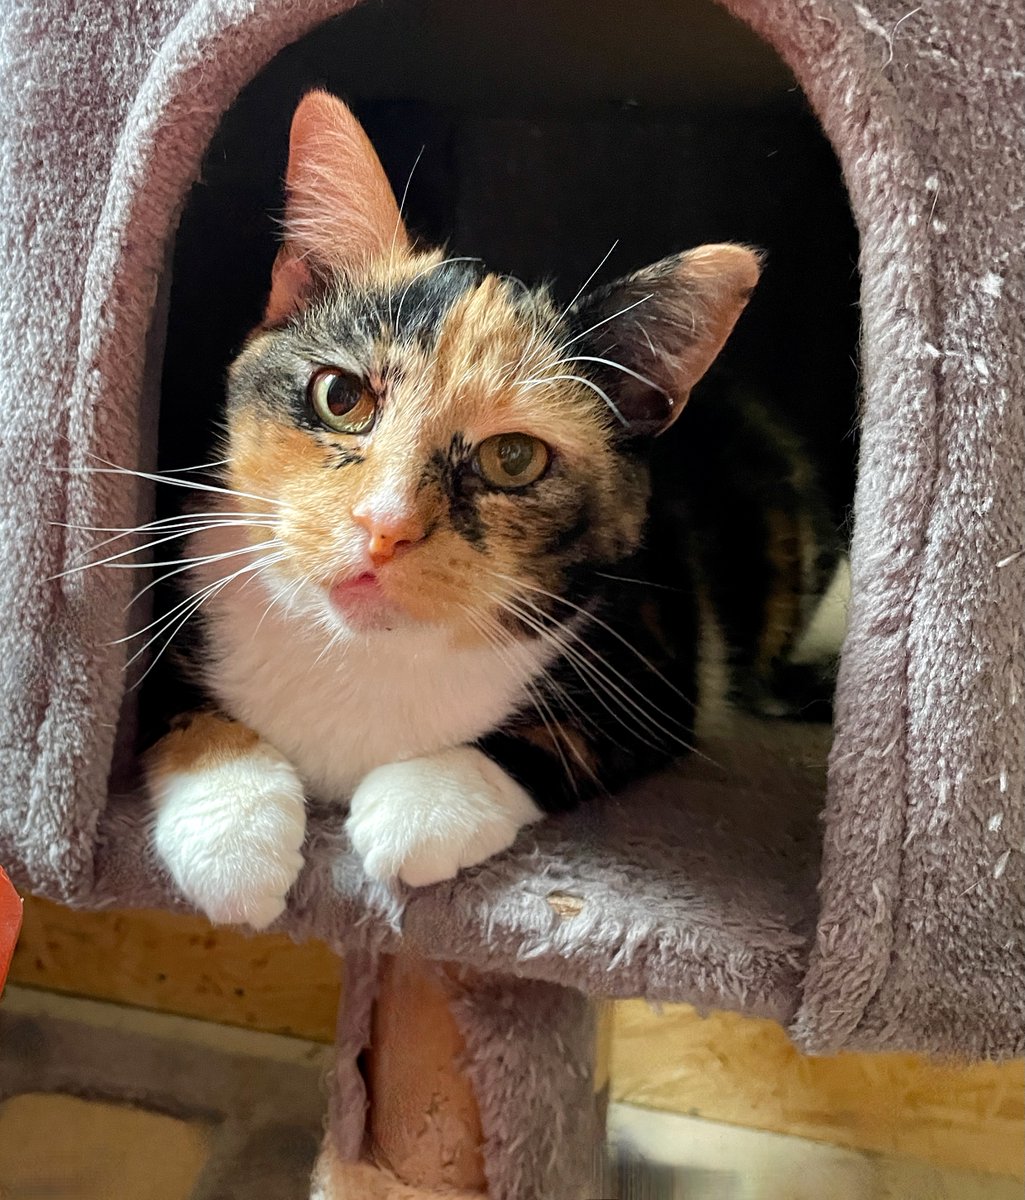 Margo gets sweeter every day & we can tell she's eager for a home. She loves belly rubs, is fine with other cats, & will bond deeply. Let's get her noticed!😻#cats #pets #FridayFeeling #fridaymorning #FridayVibes #friday #va #dc #noVA #virginia #washingtondc #maryland #catlovers